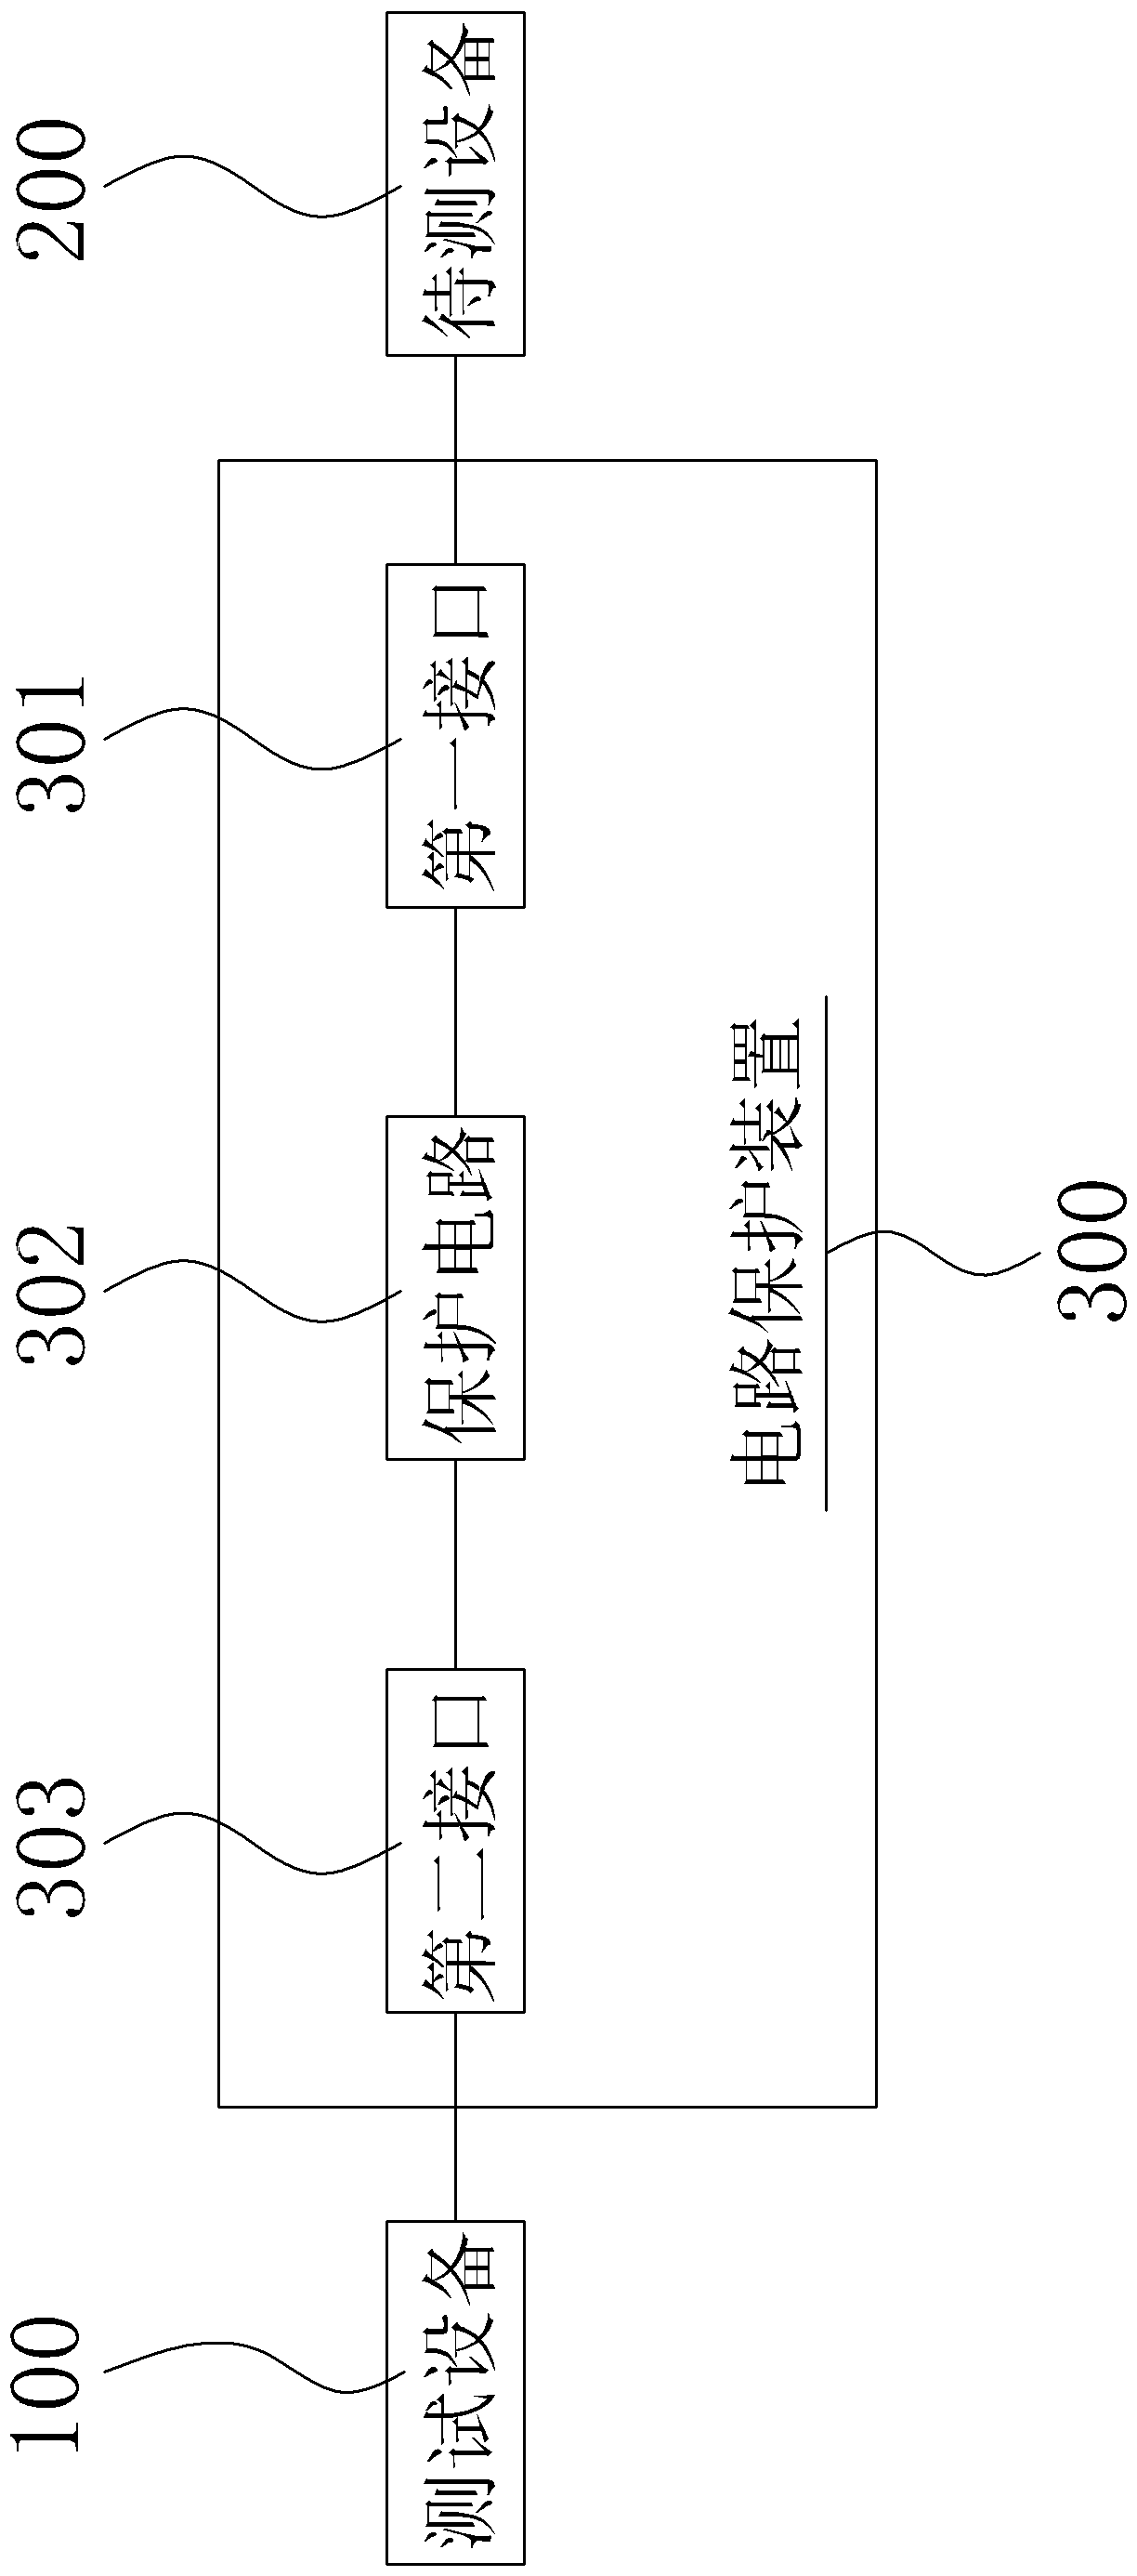 circuit protection device